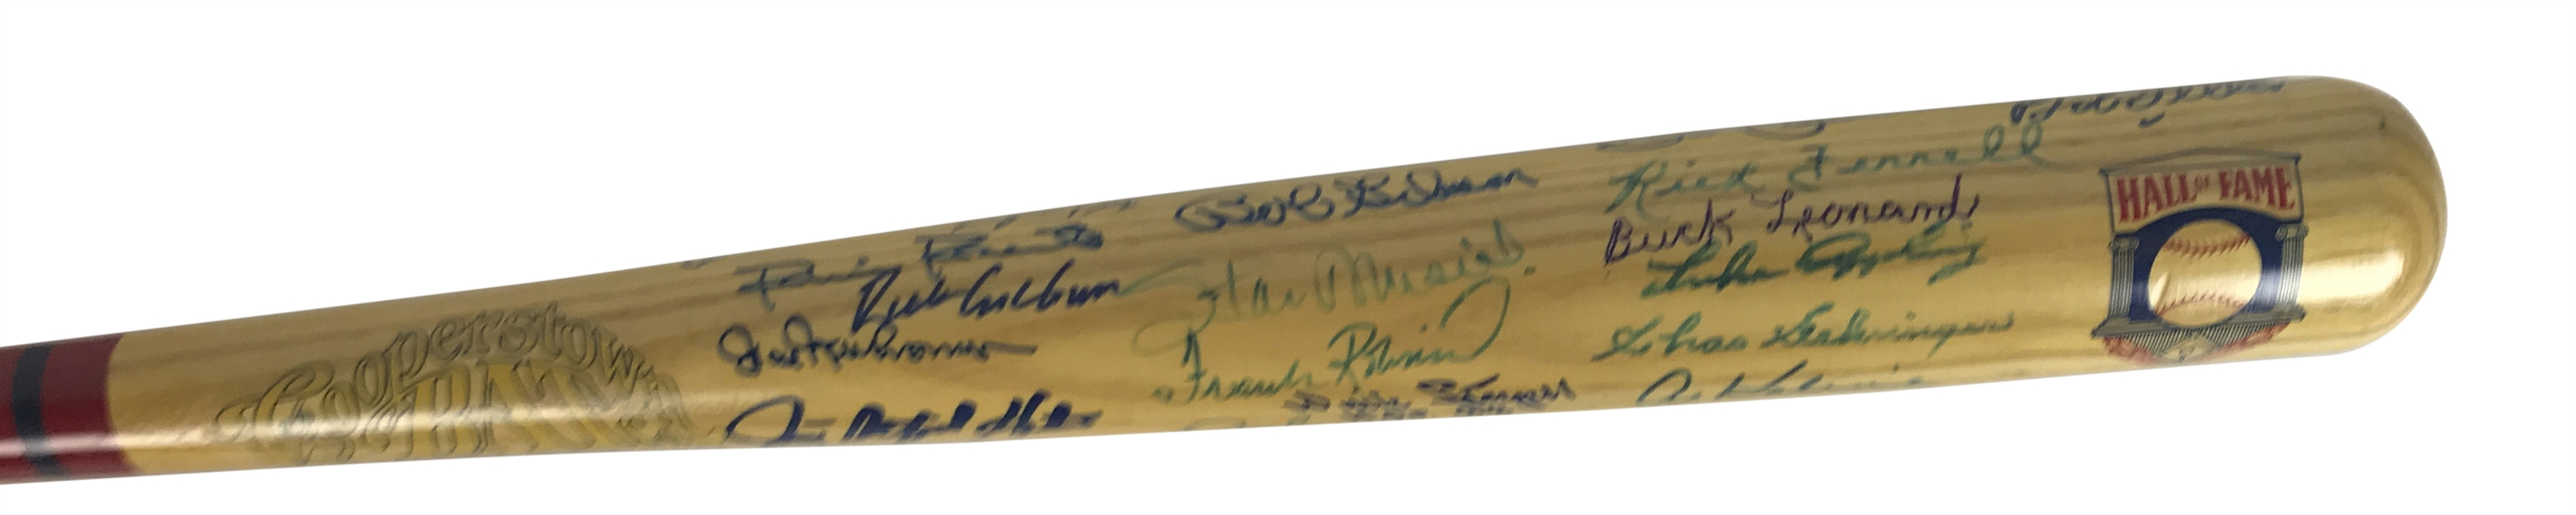 Hall of Fame Multi-Signed Cooperstown Baseball Bat w/ Musial, Robinson & Others! (Beckett/BAS Guaranteed)